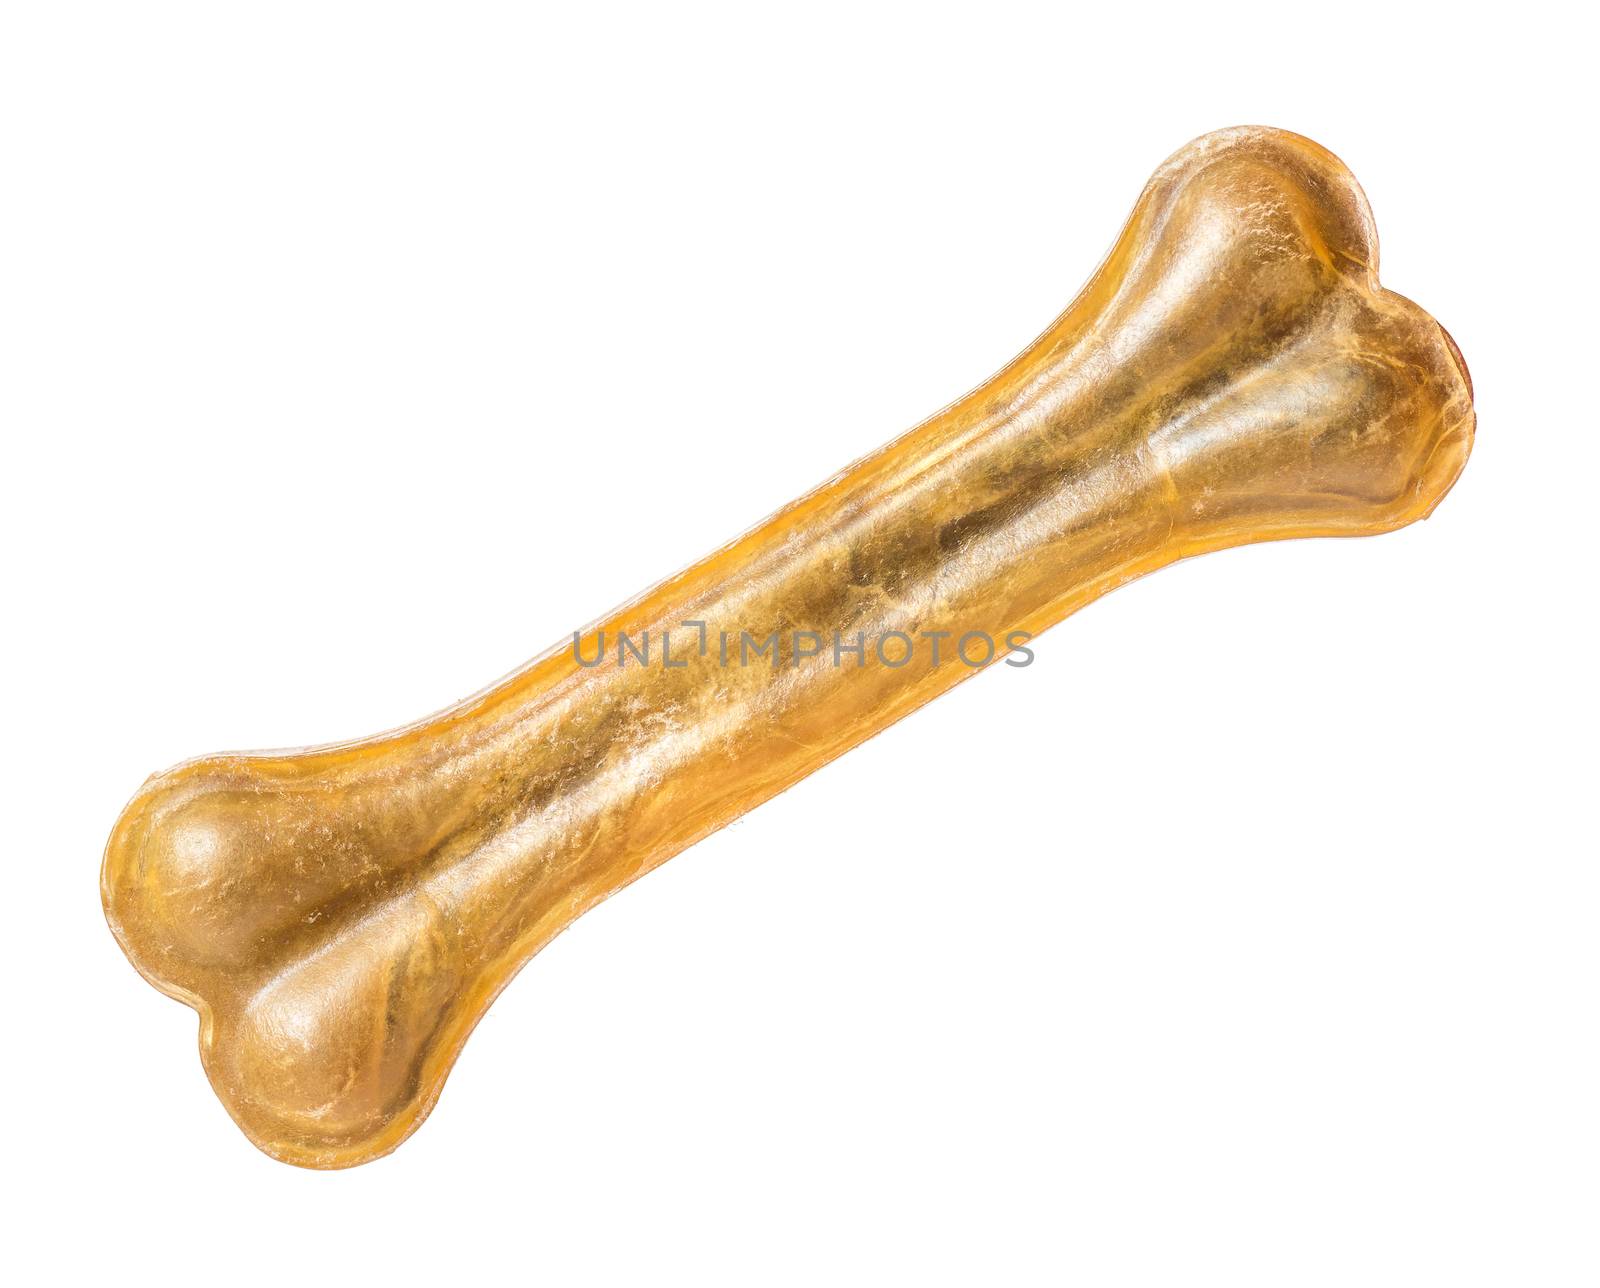 Artificial dog chew bone food with vitamins isolated on white background